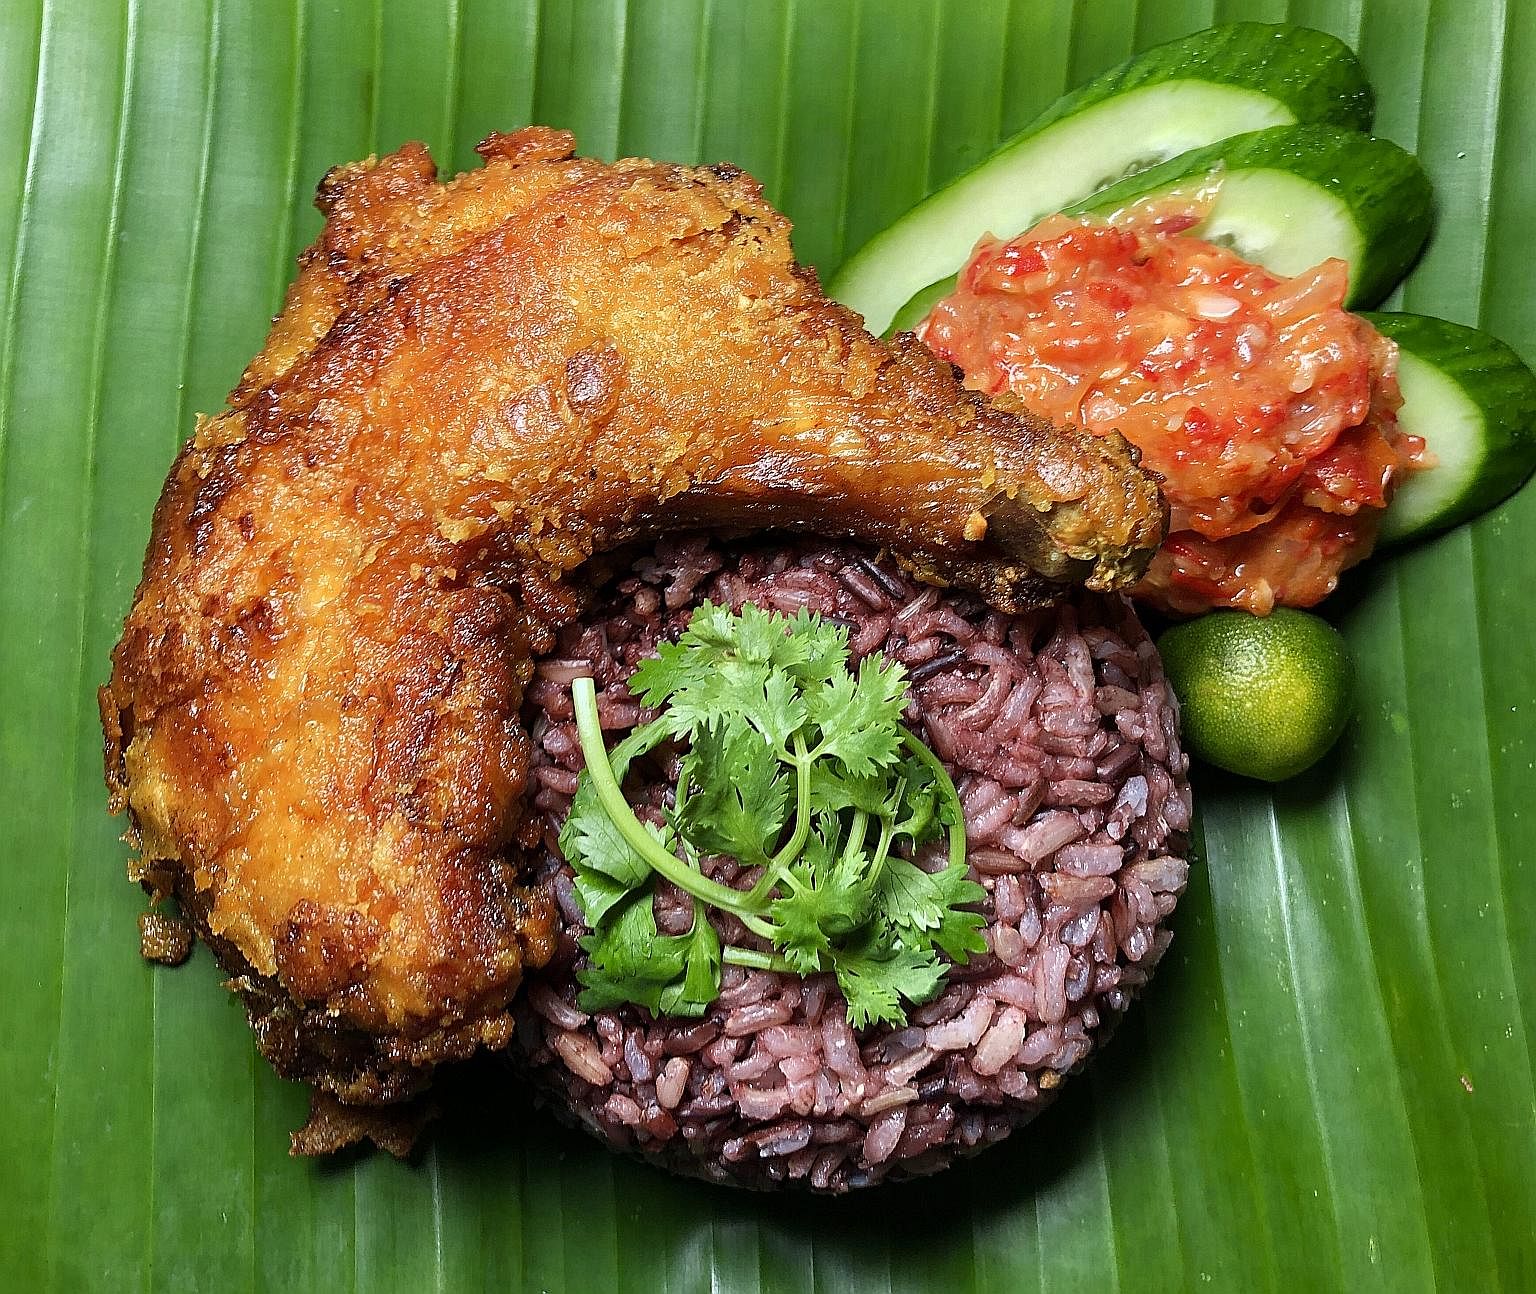 Covid 19 Stay Home Recipe Ayam Penyet With Crispy Batter Food News Top Stories The Straits Times